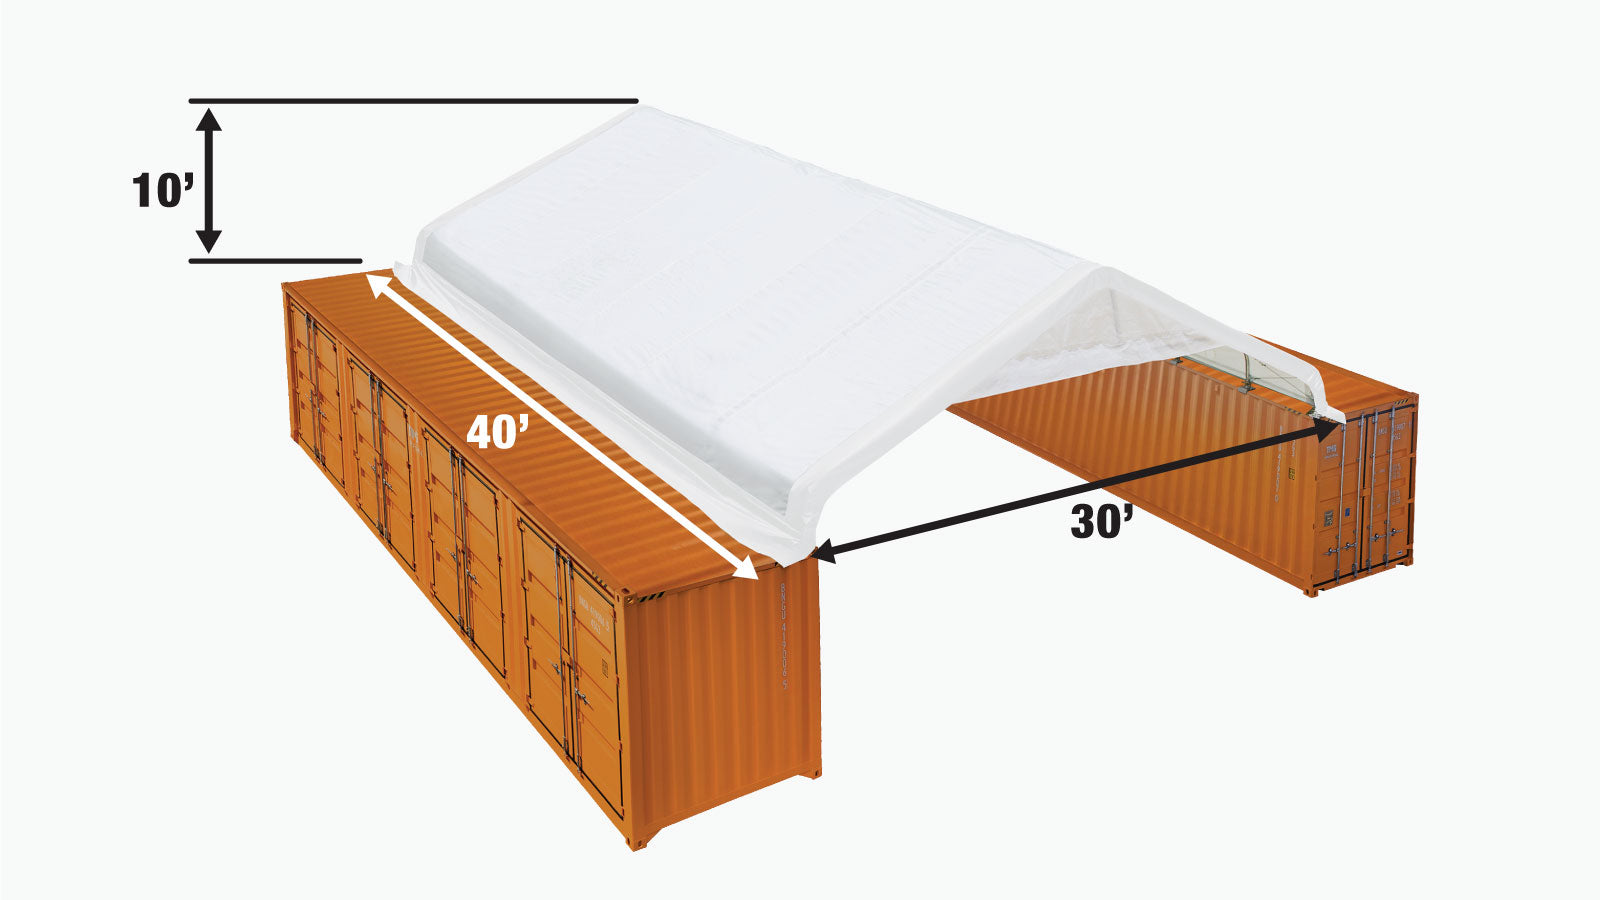 TMG Industrial 30' x 40' PVC Fabric Container Peak Roof Shelter with End Wall & Partial Front Drop Pro Series, Fire Retardant, Water Resistant, UV Protected, TMG-ST3041CVF-specifications-image